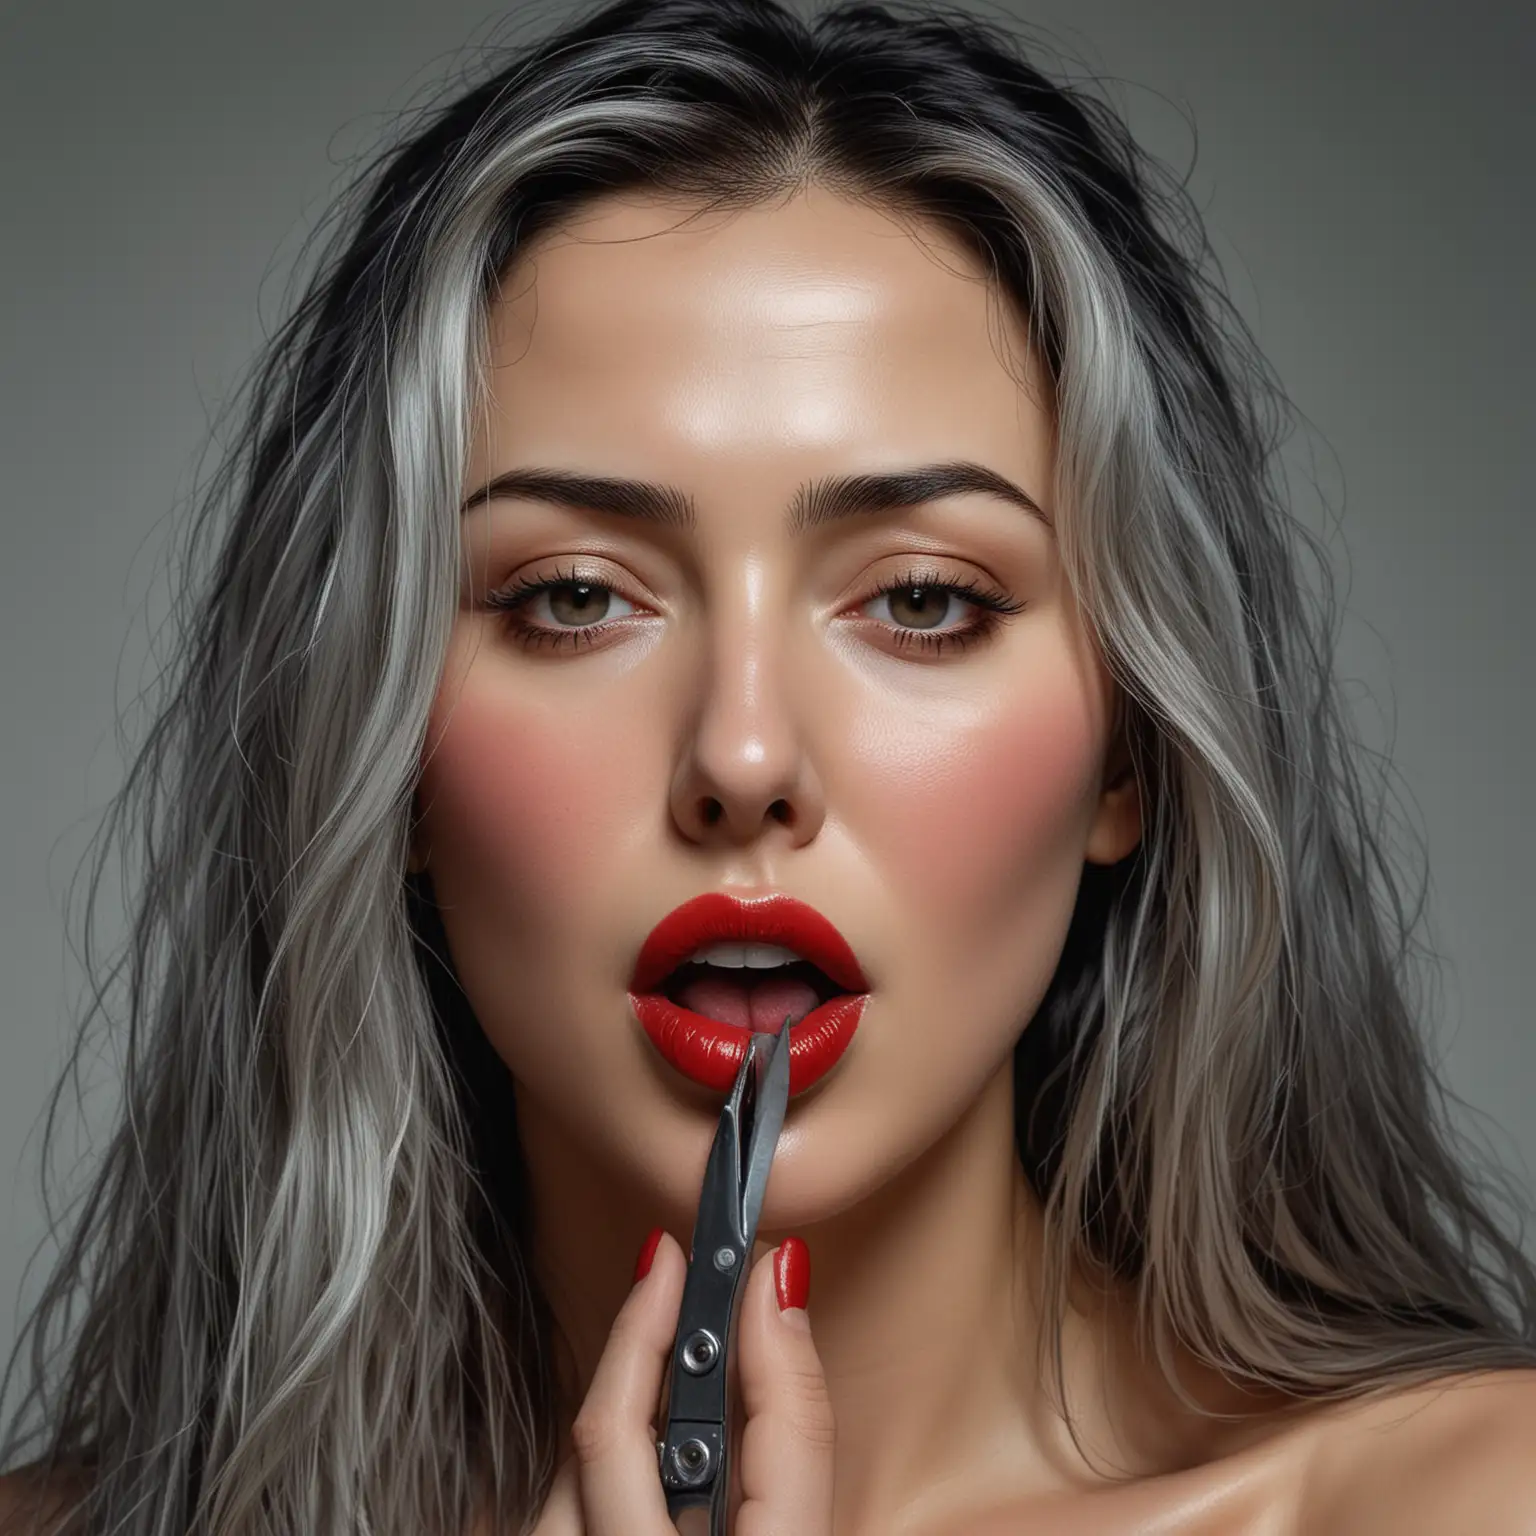 Realistic-Portrait-of-Monica-Bellucci-Lookalike-Holding-Scissors-with-Tongue-Out